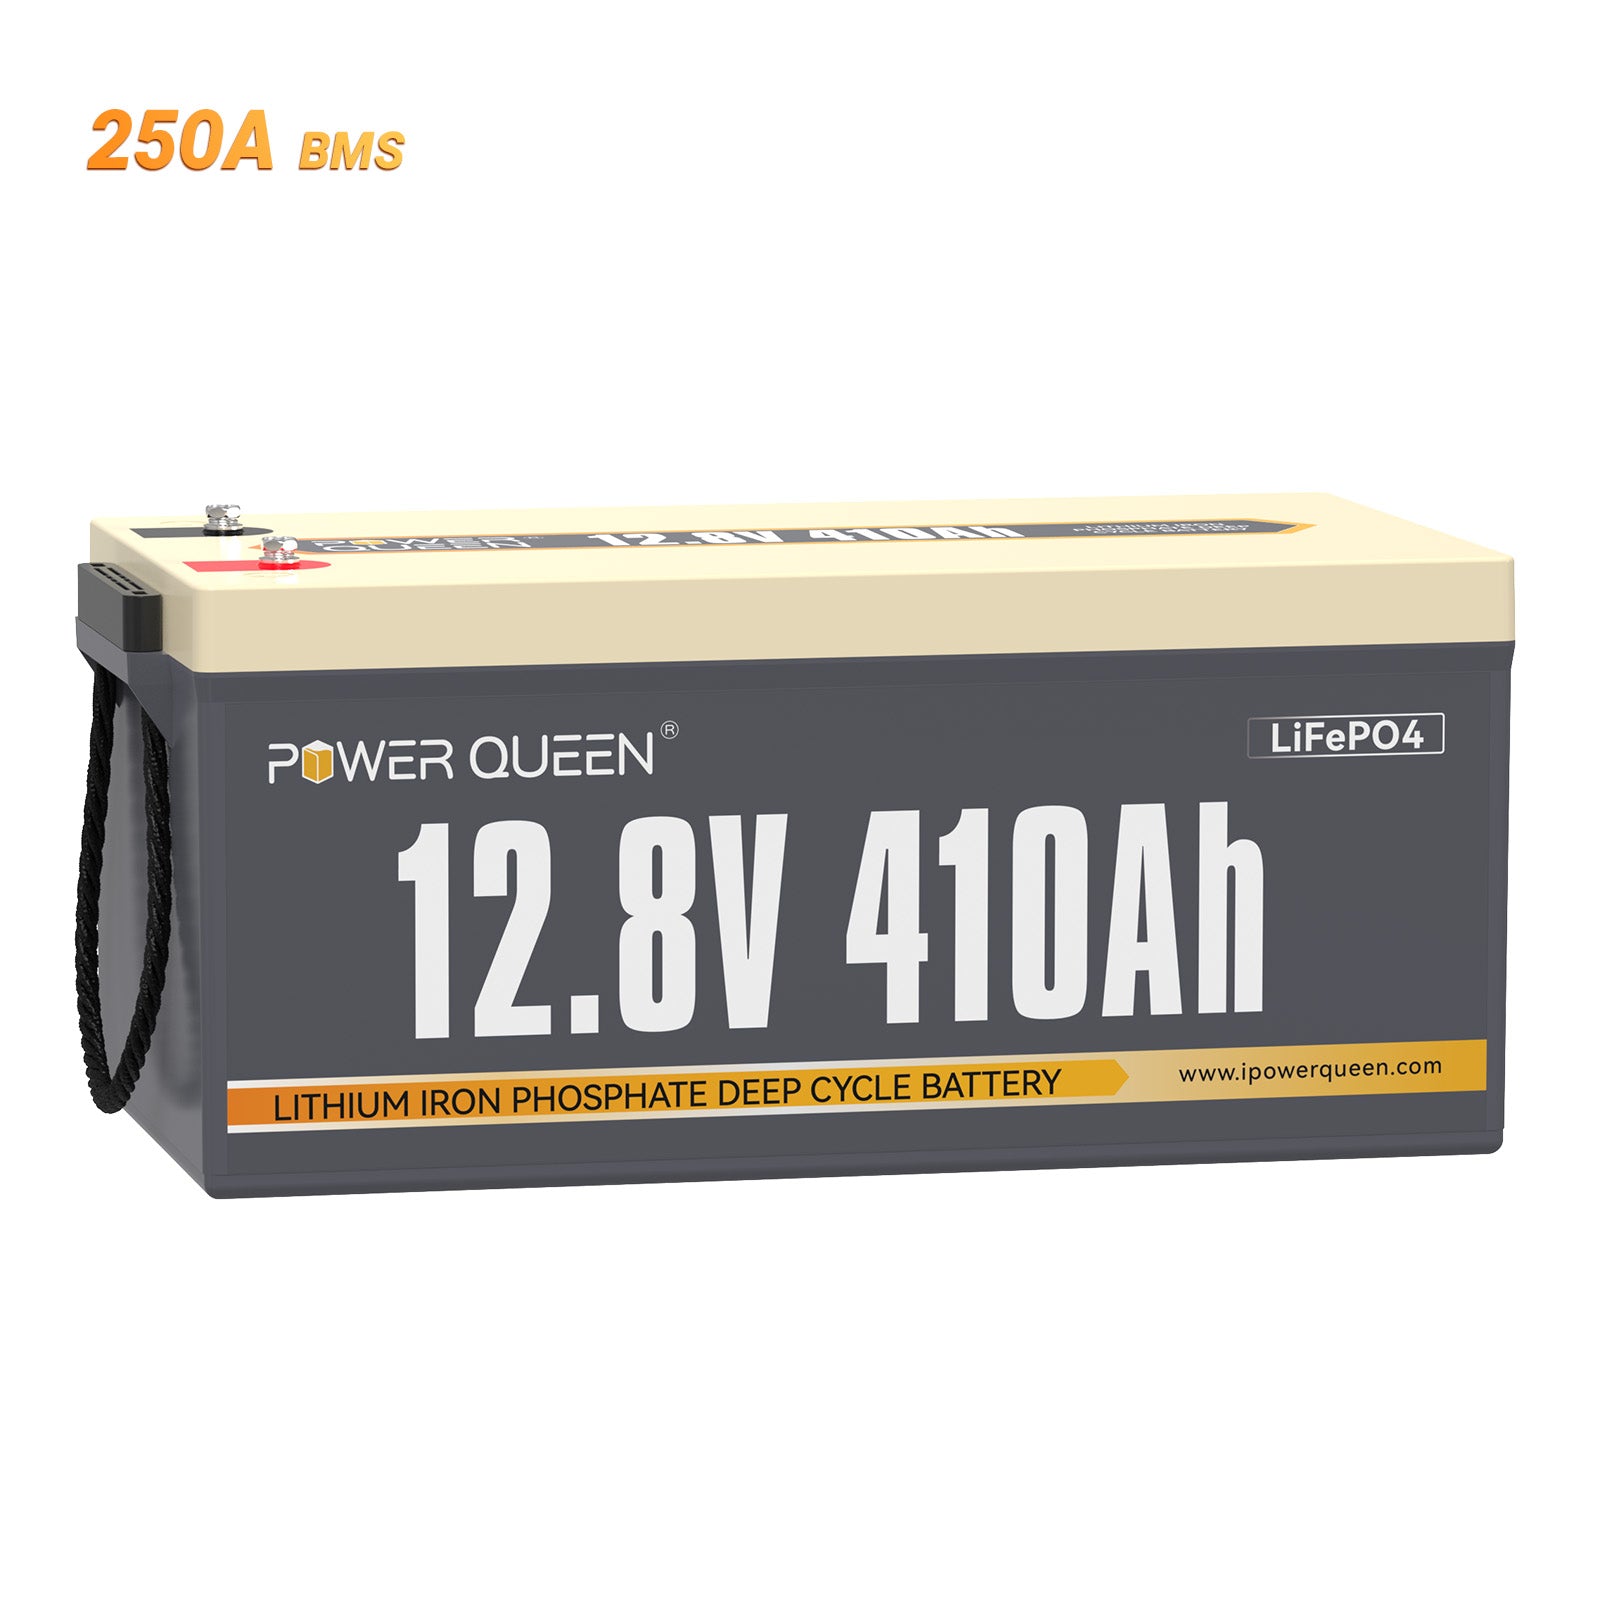 Power Queen 12V 410Ah LiFePO4 battery, built-in 250A BMS